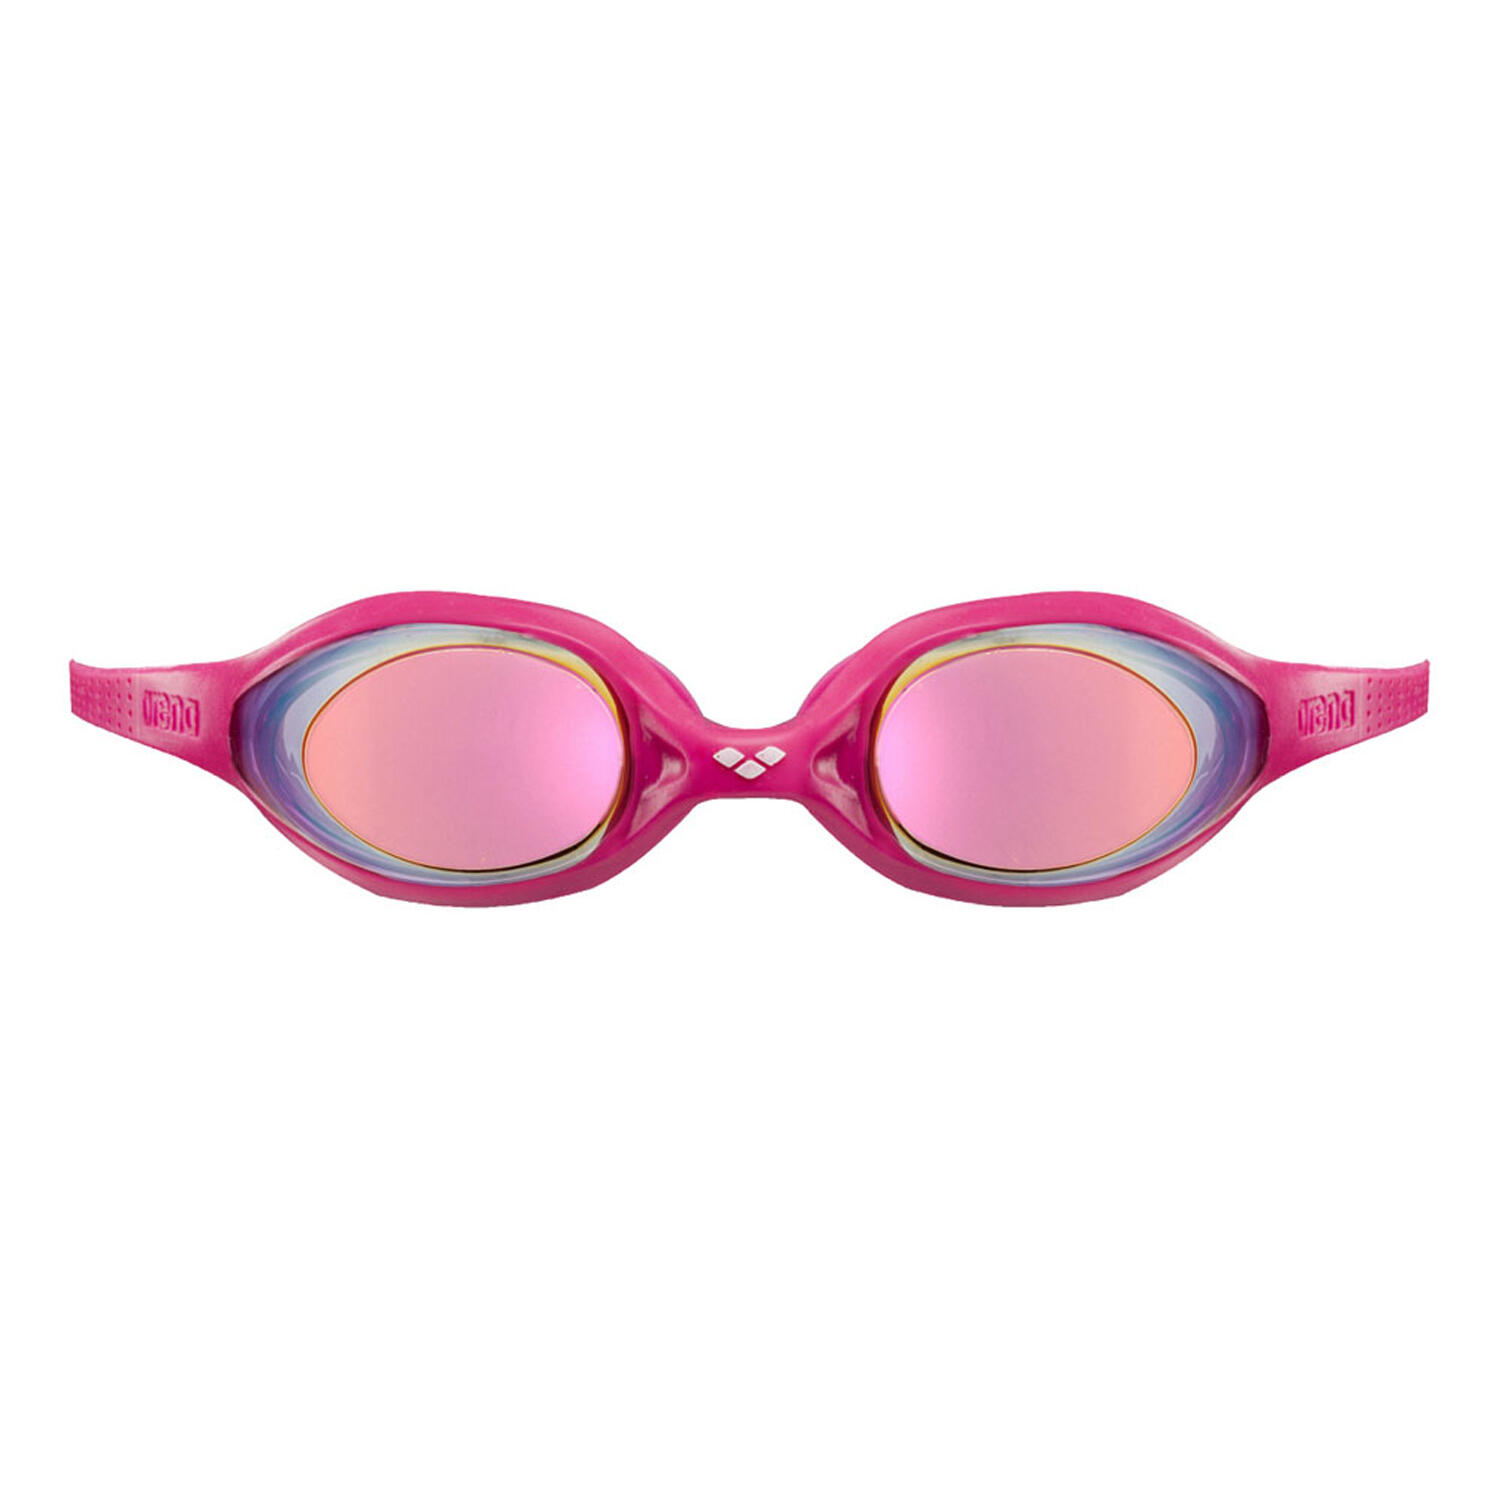 Arena Spider Mirrored Goggles Pink/White 2/2